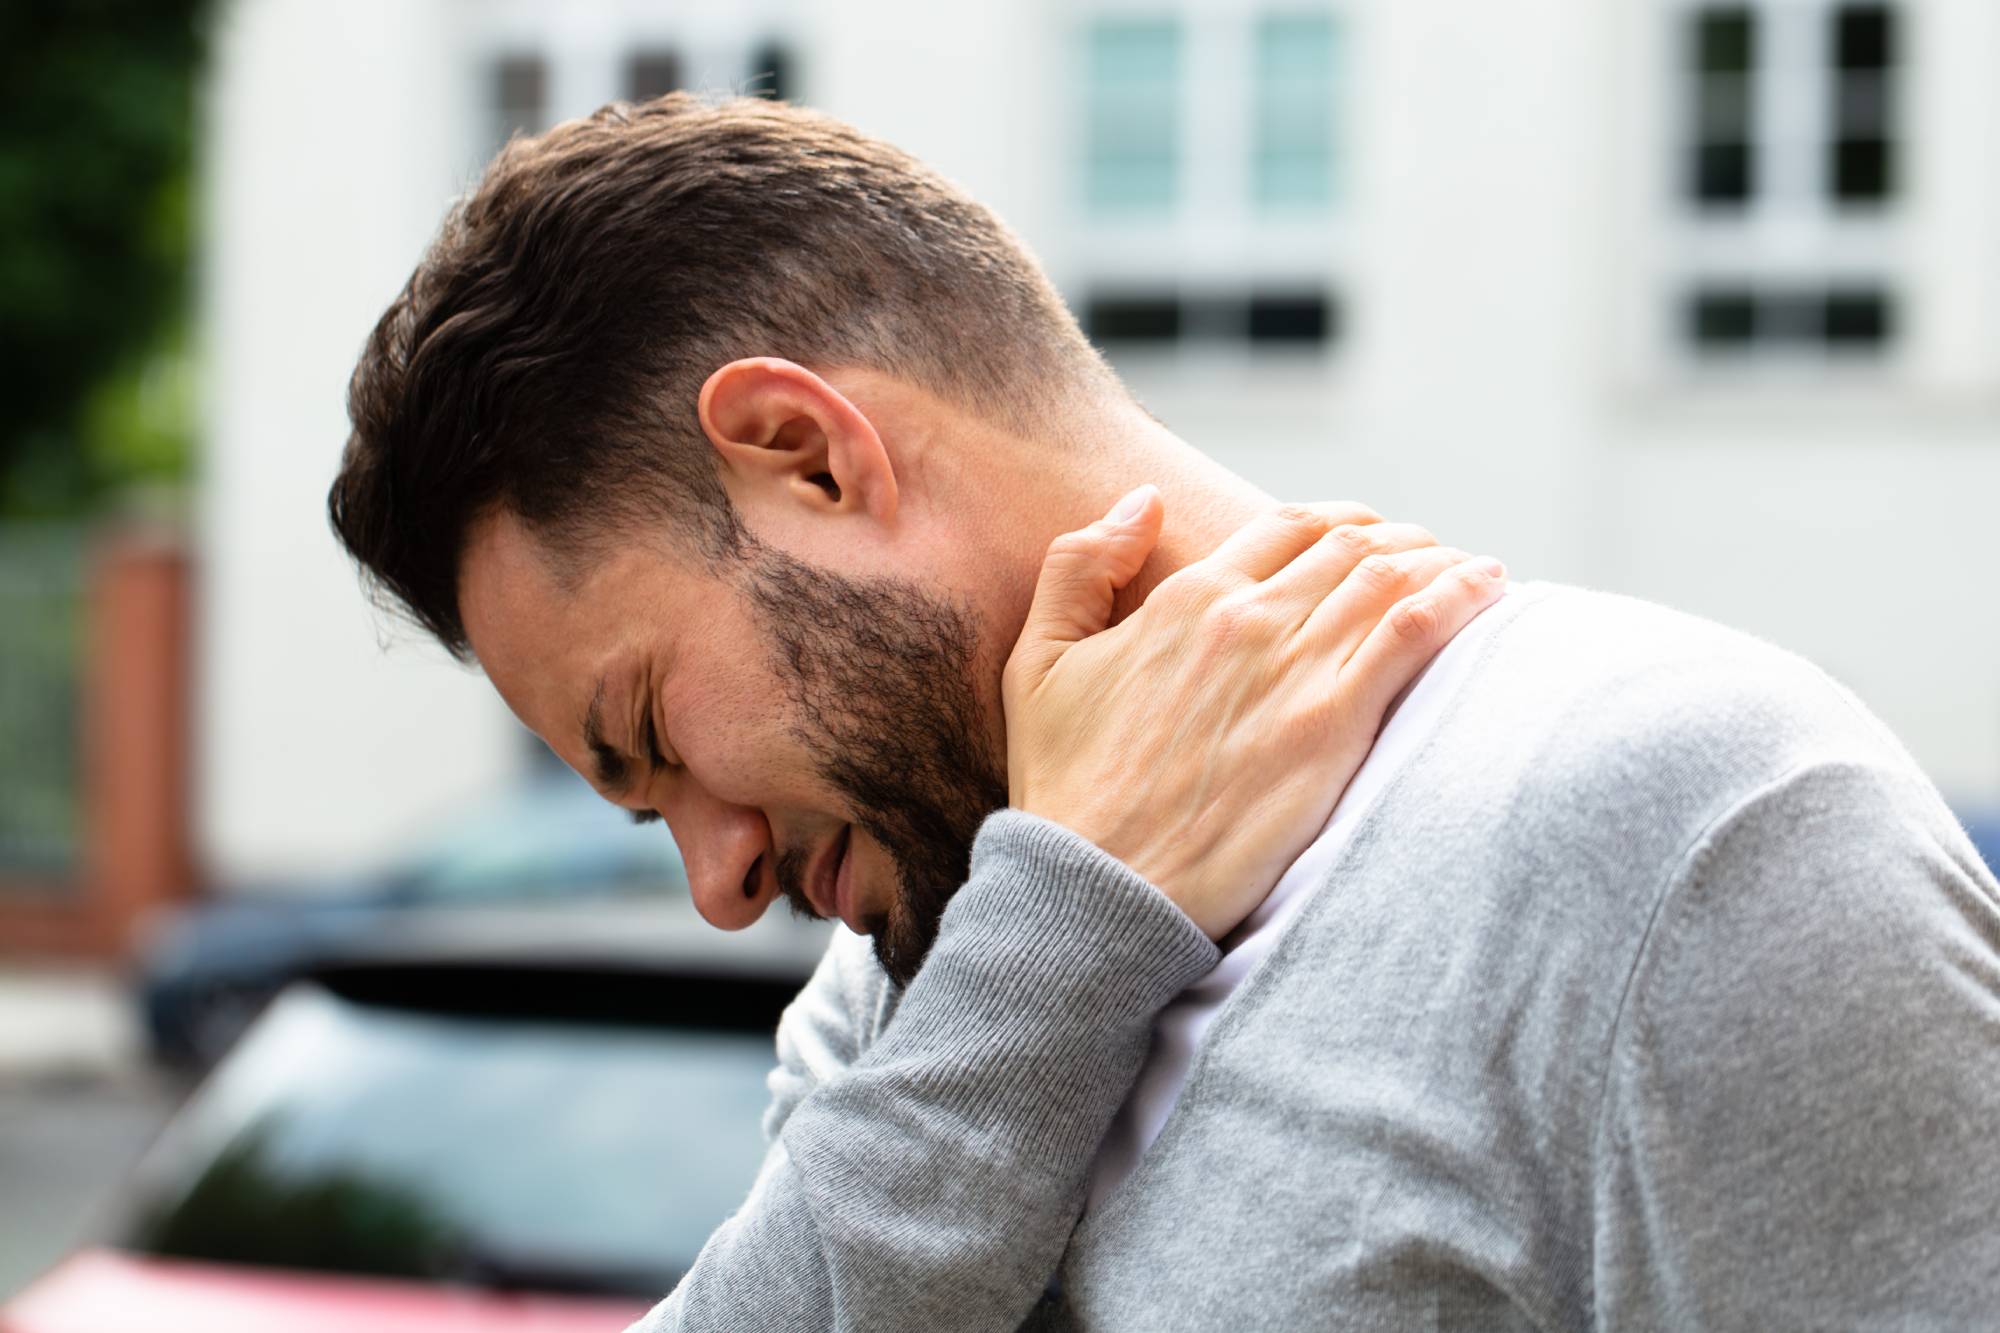 A person struggles with neck pain